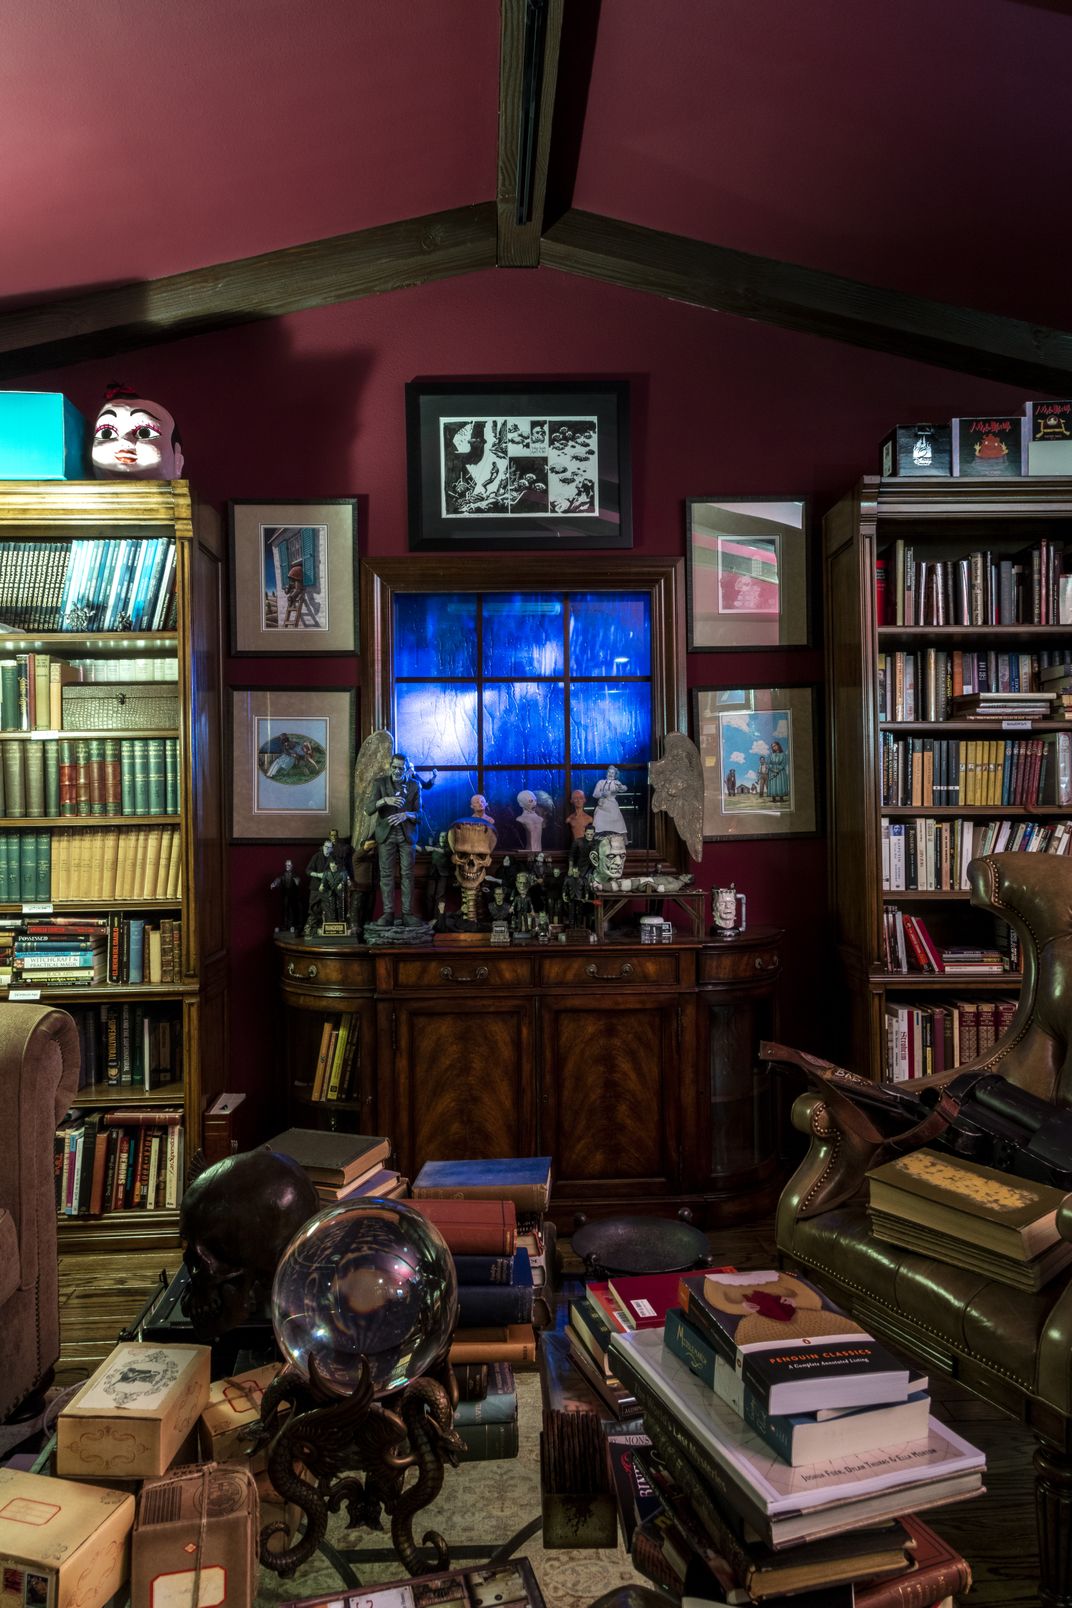 Director Guillermo del Toro Shares the Monsters in His Closet With the Public